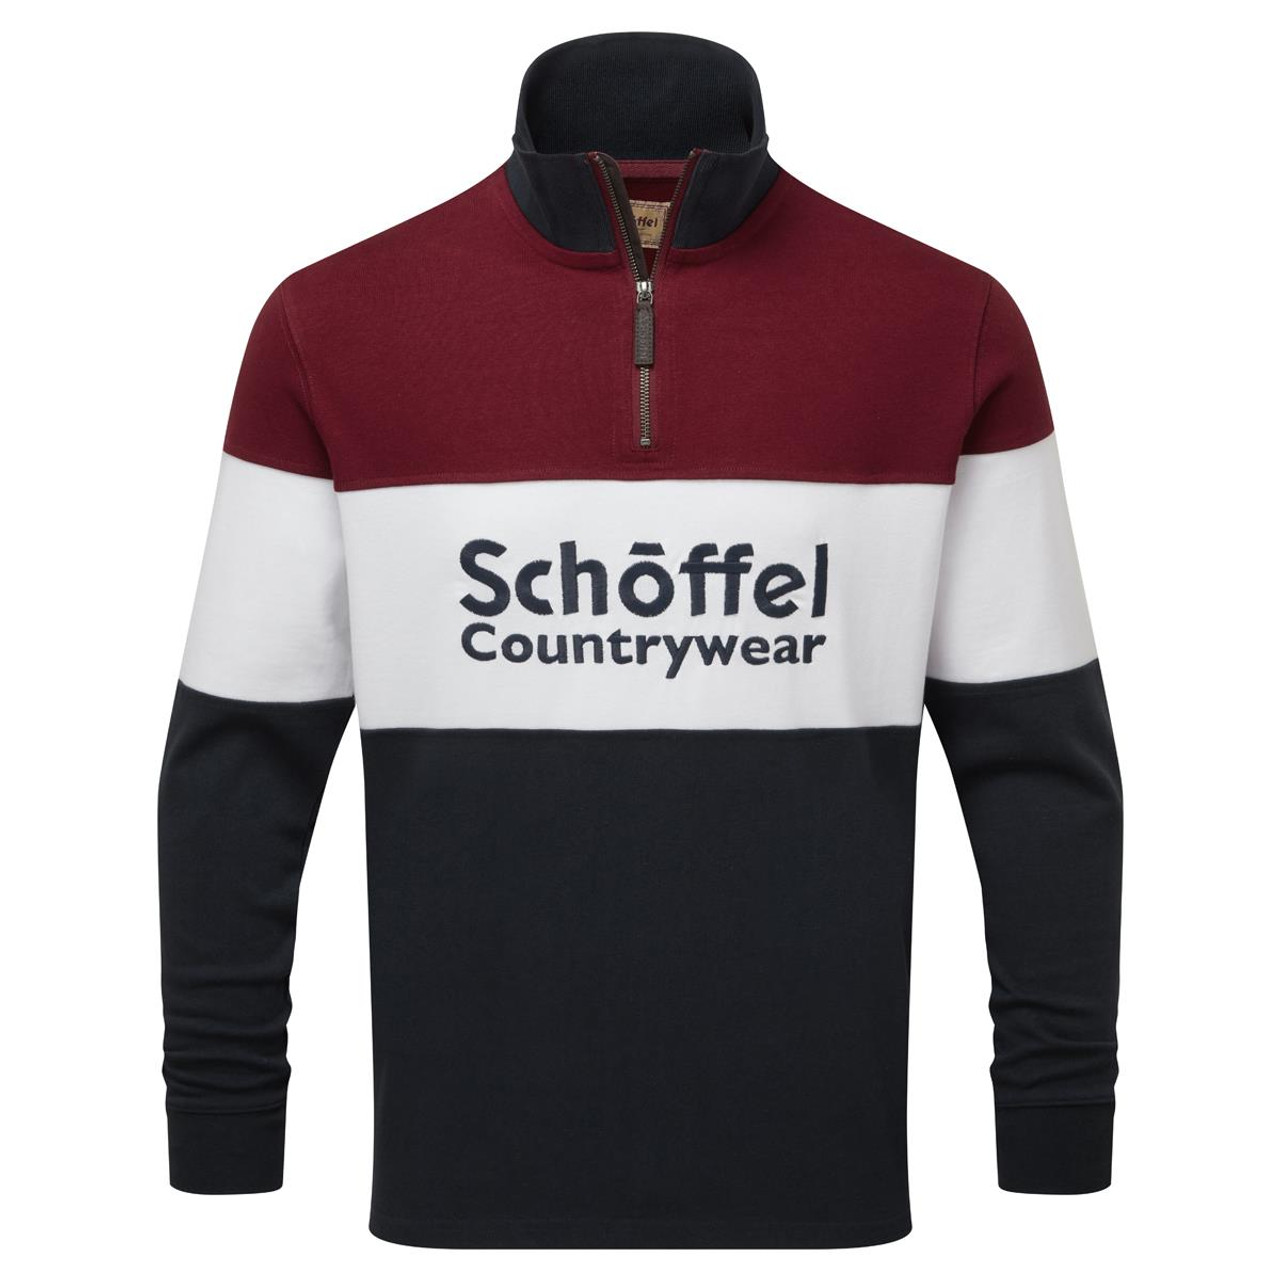 What is the style of the Schoffel Exeter Heritage 1/4 Zip Unisex?